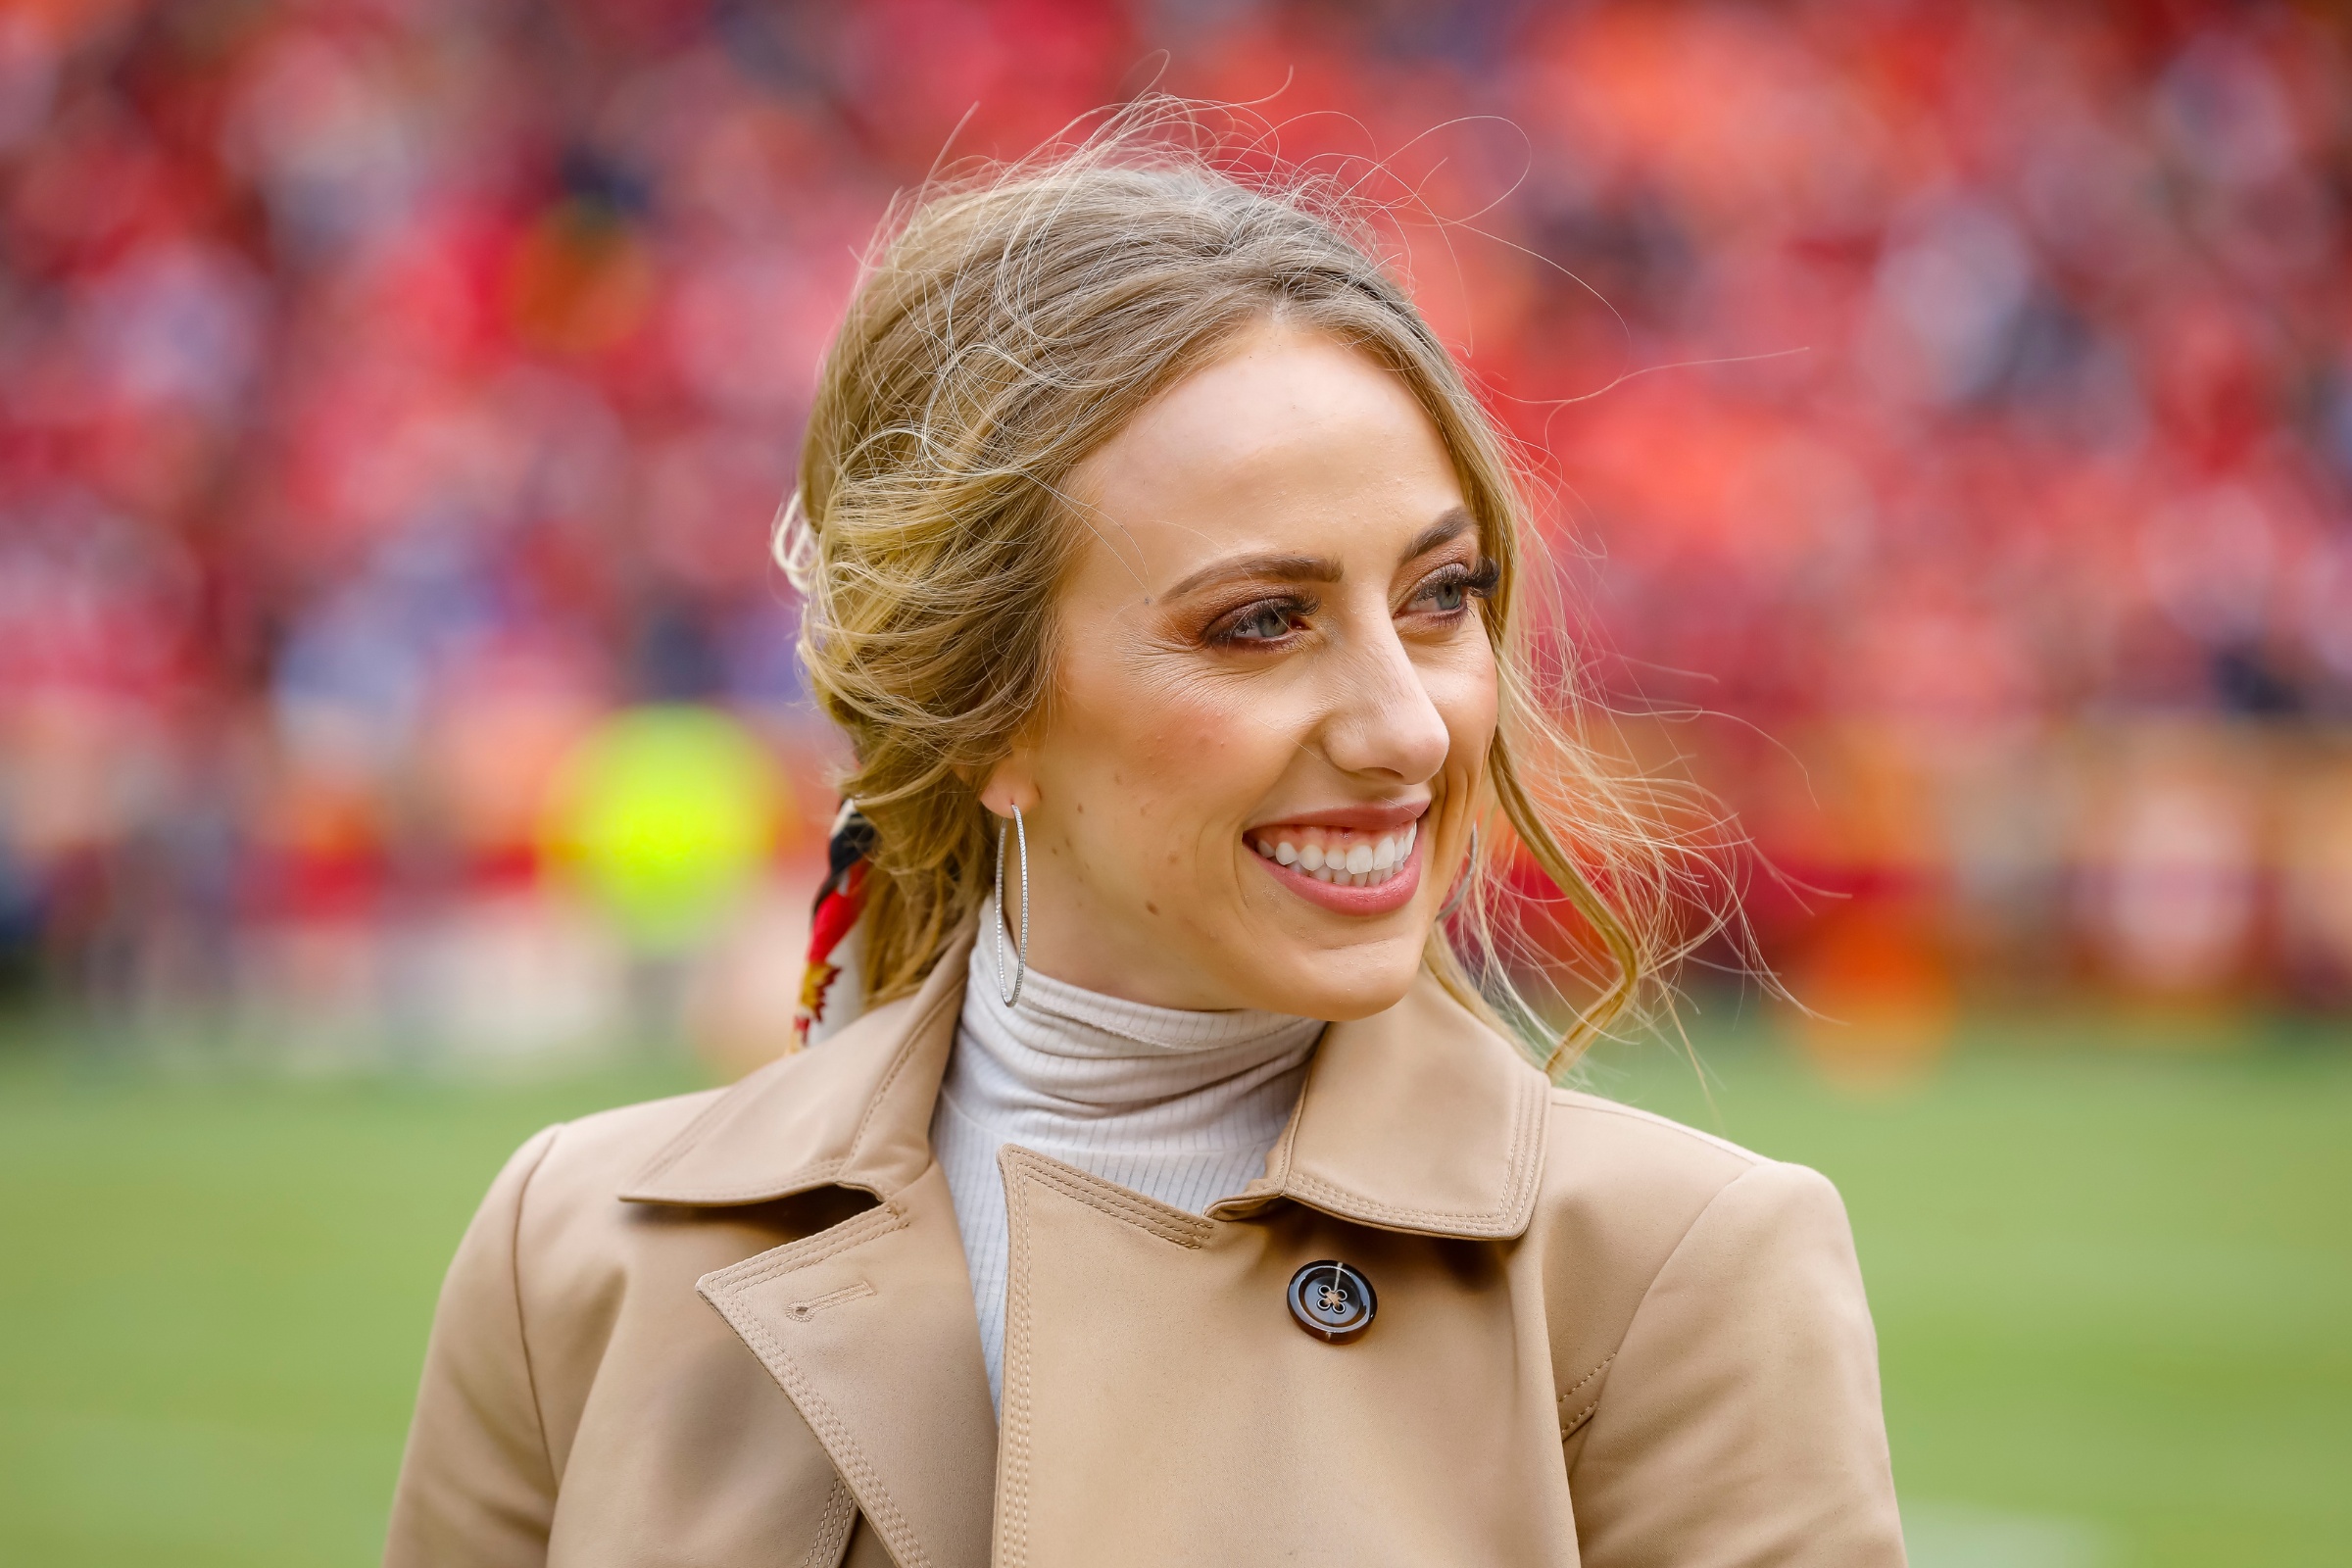 Fan of Patrick Mahomes Wife Slams Backlash—Constantly Getting Hated image